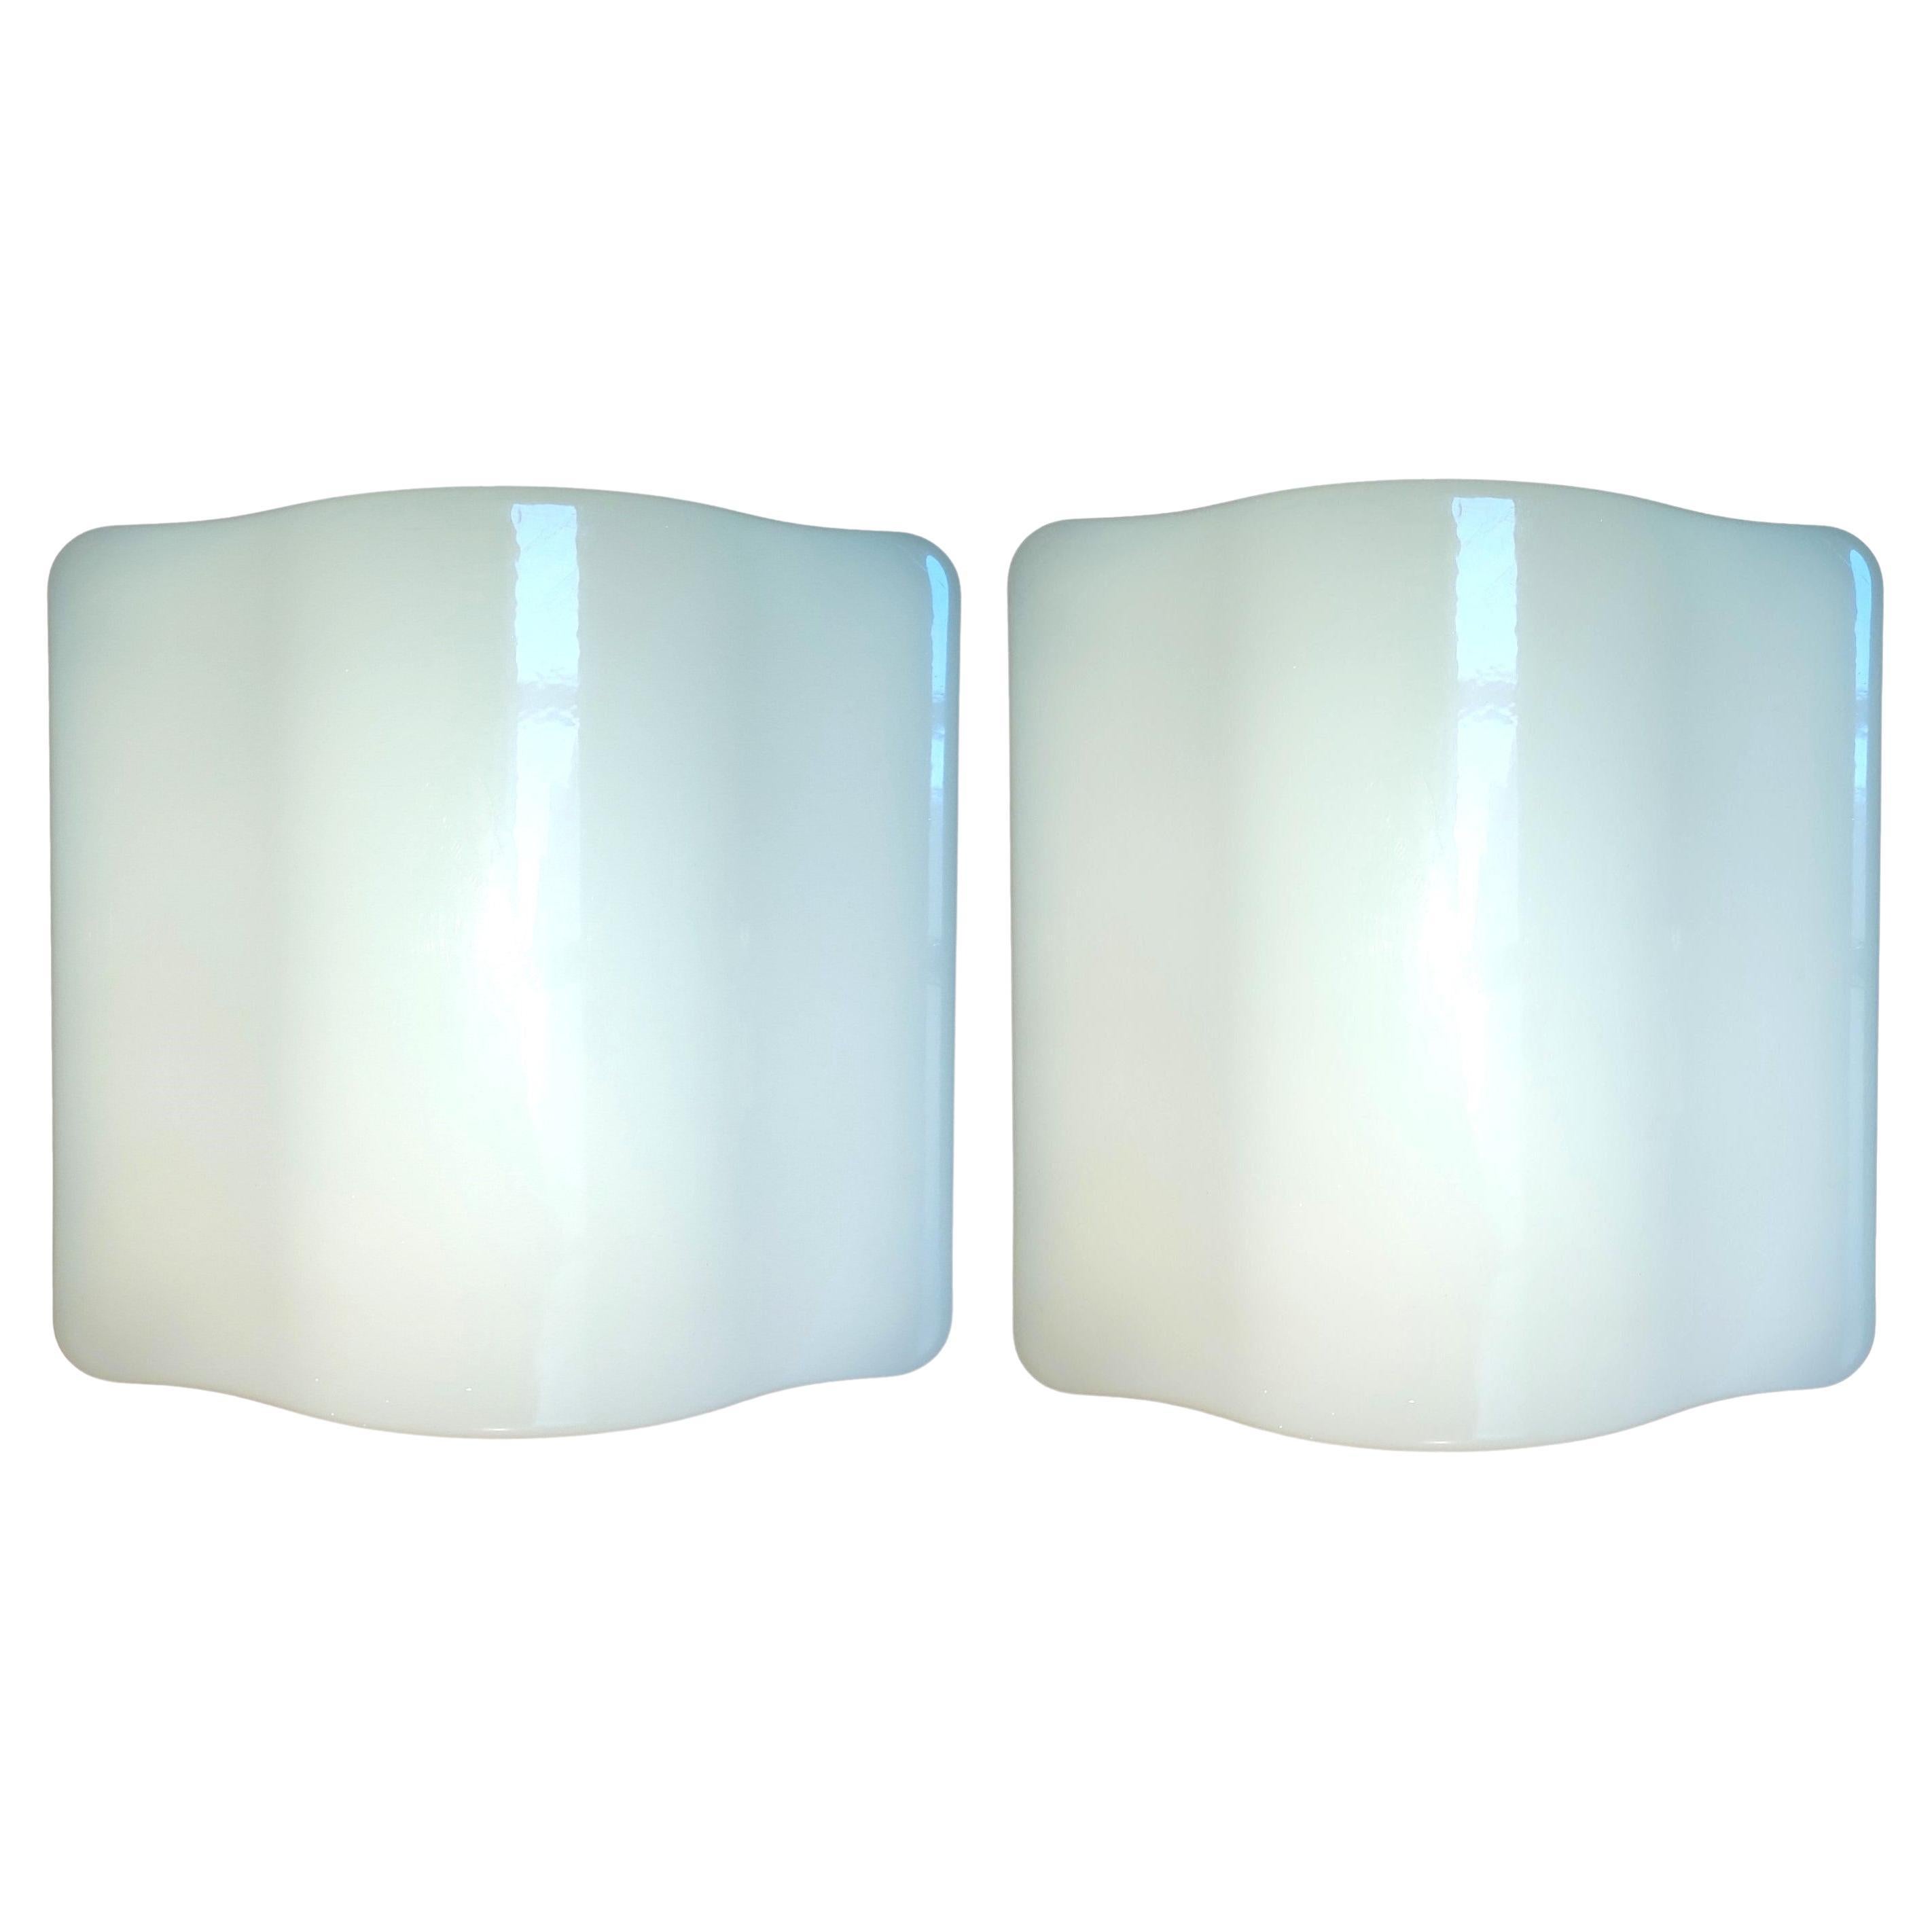 pair of wall sconces iguzzini wall lamps wave model 5359 - guzzini 37x37 For Sale